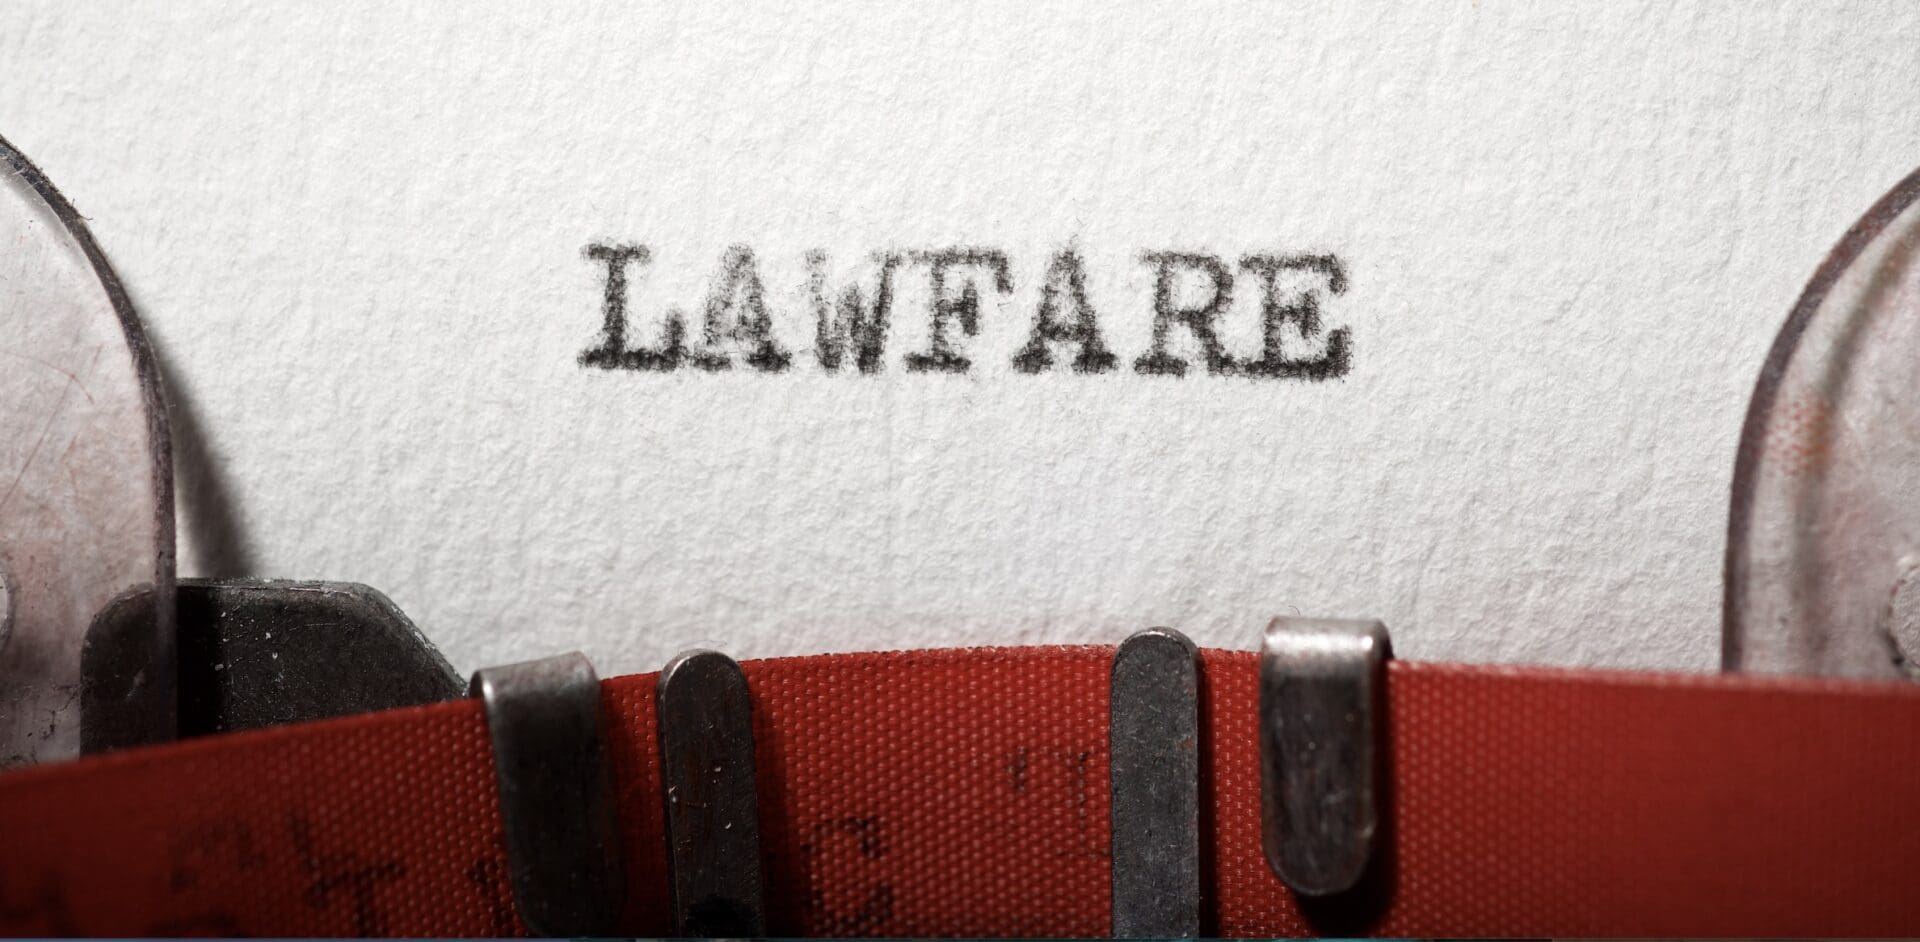 The image shows a close-up of a typewriter printing the word "lawfare".